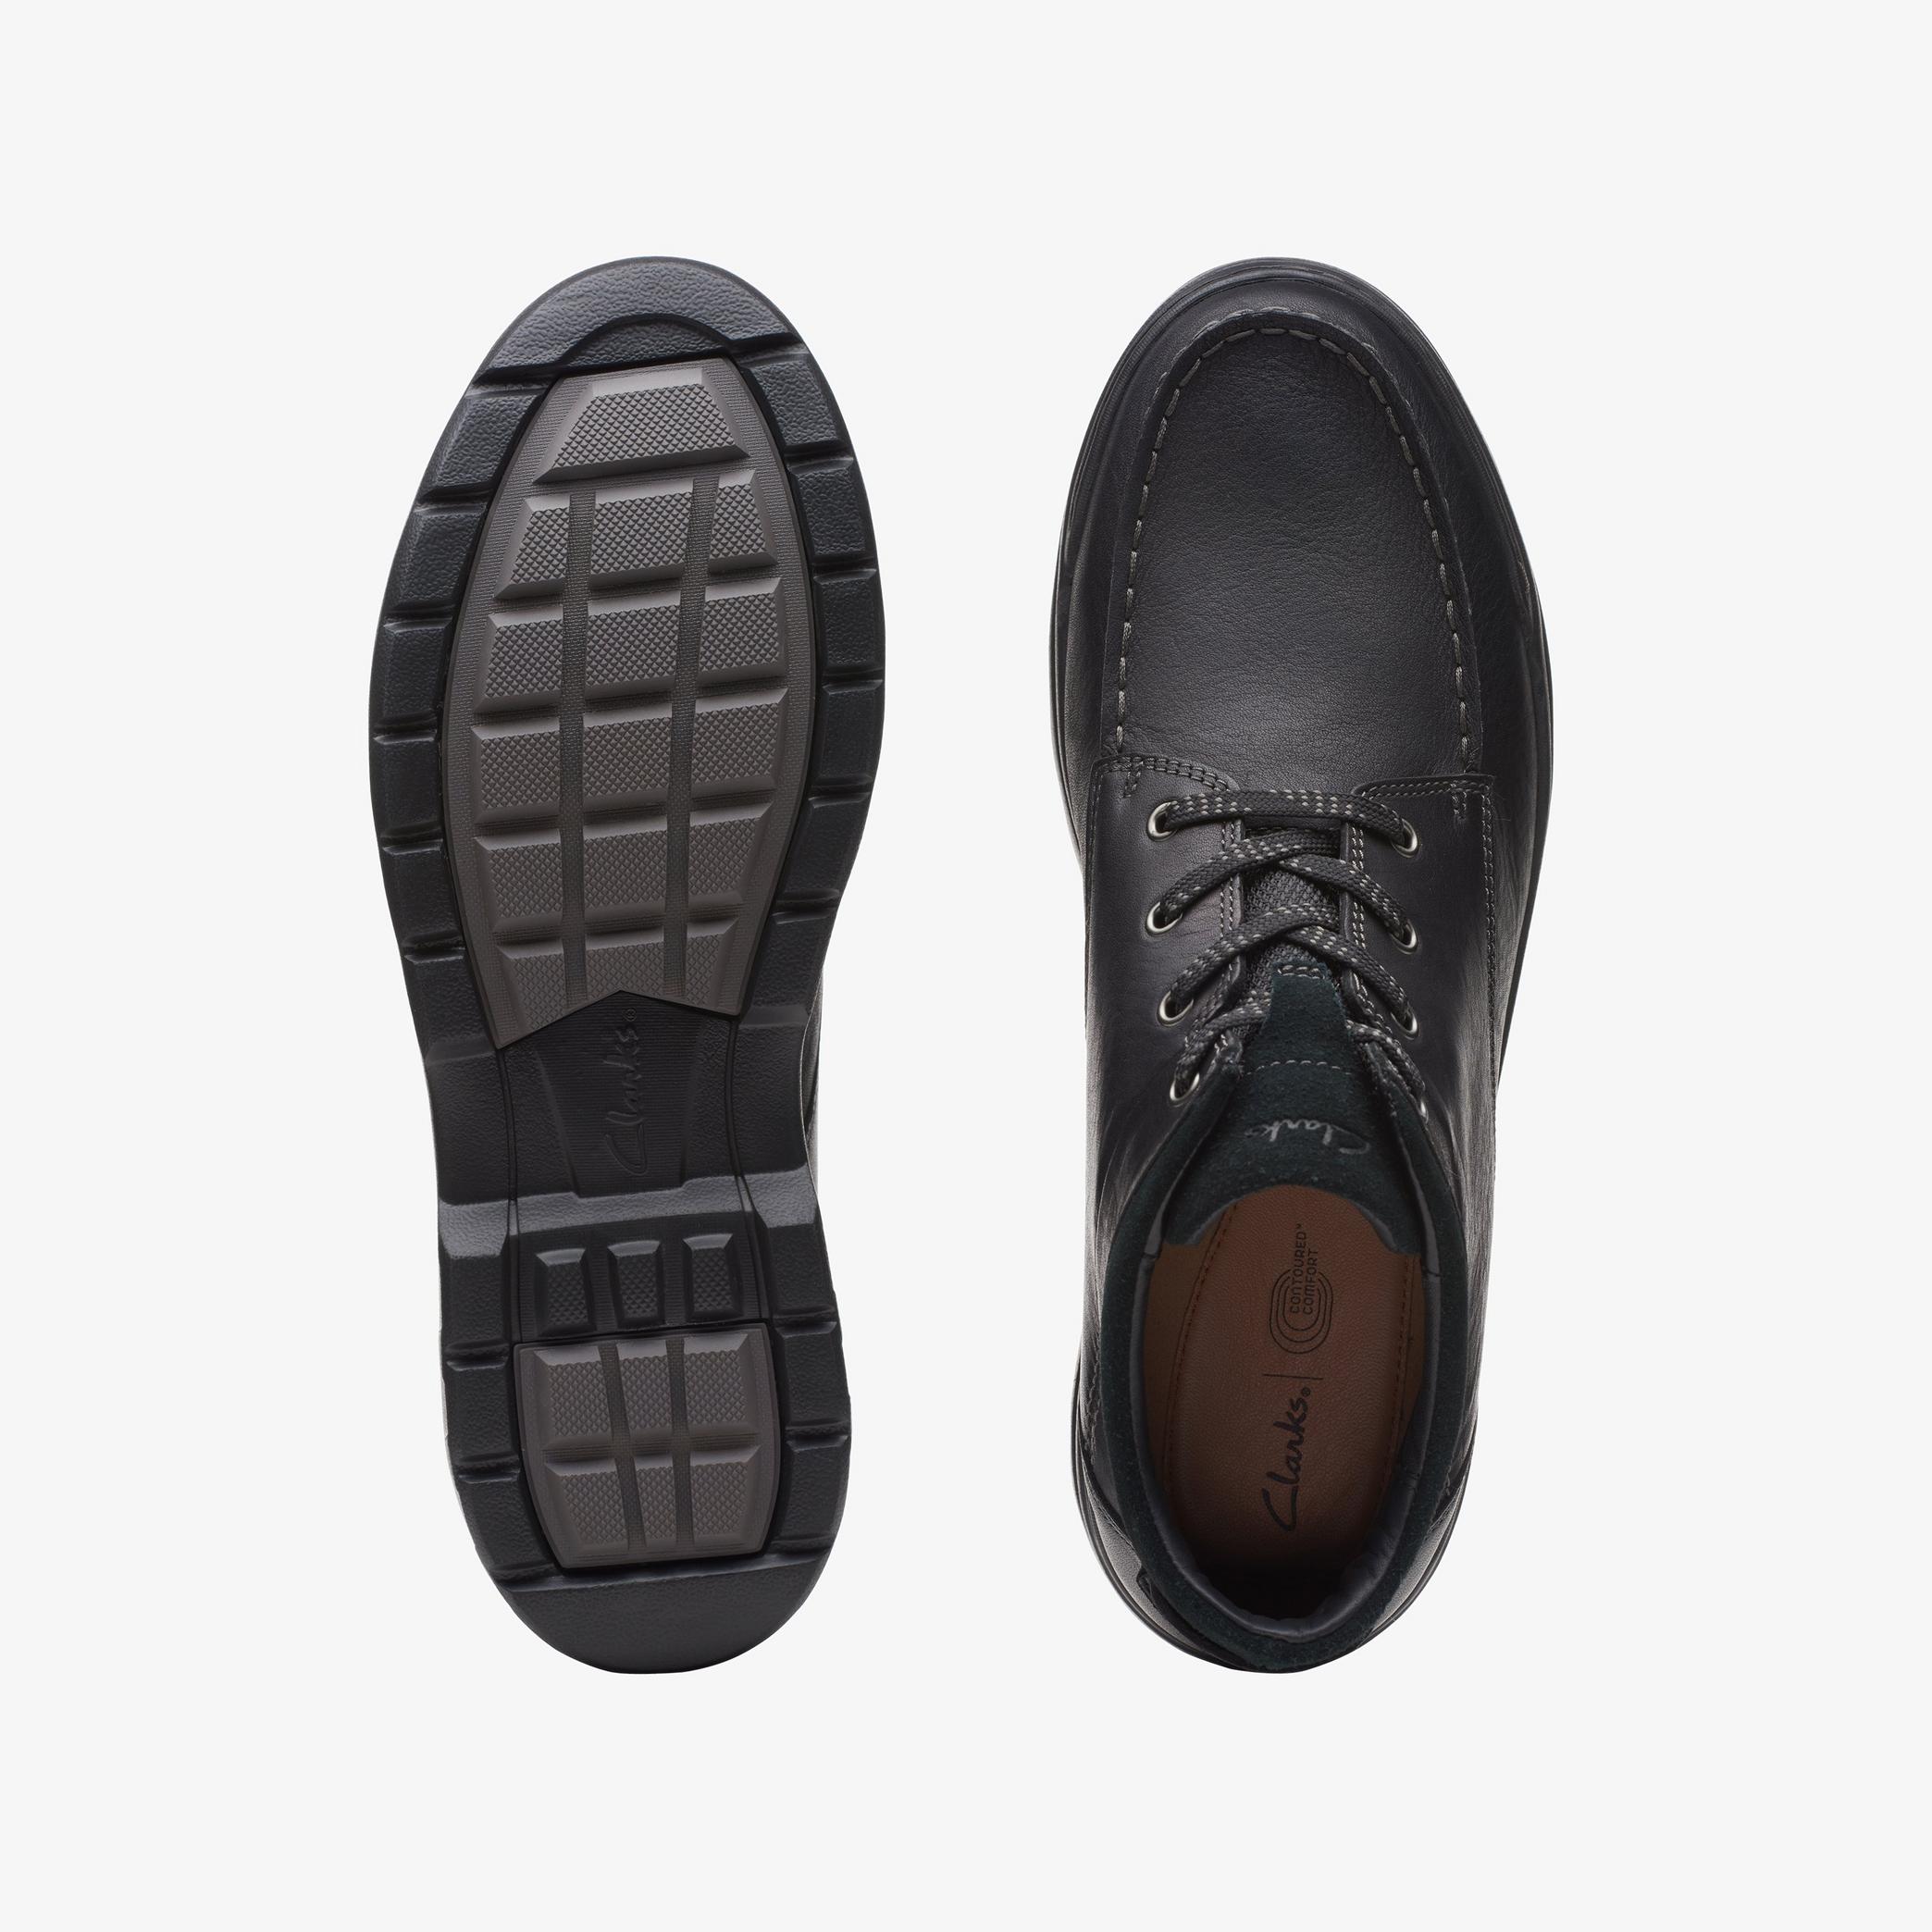 MENS Rockie 2 Hi GORE-TEX Black Leather Ankle Boots | Clarks Outlet